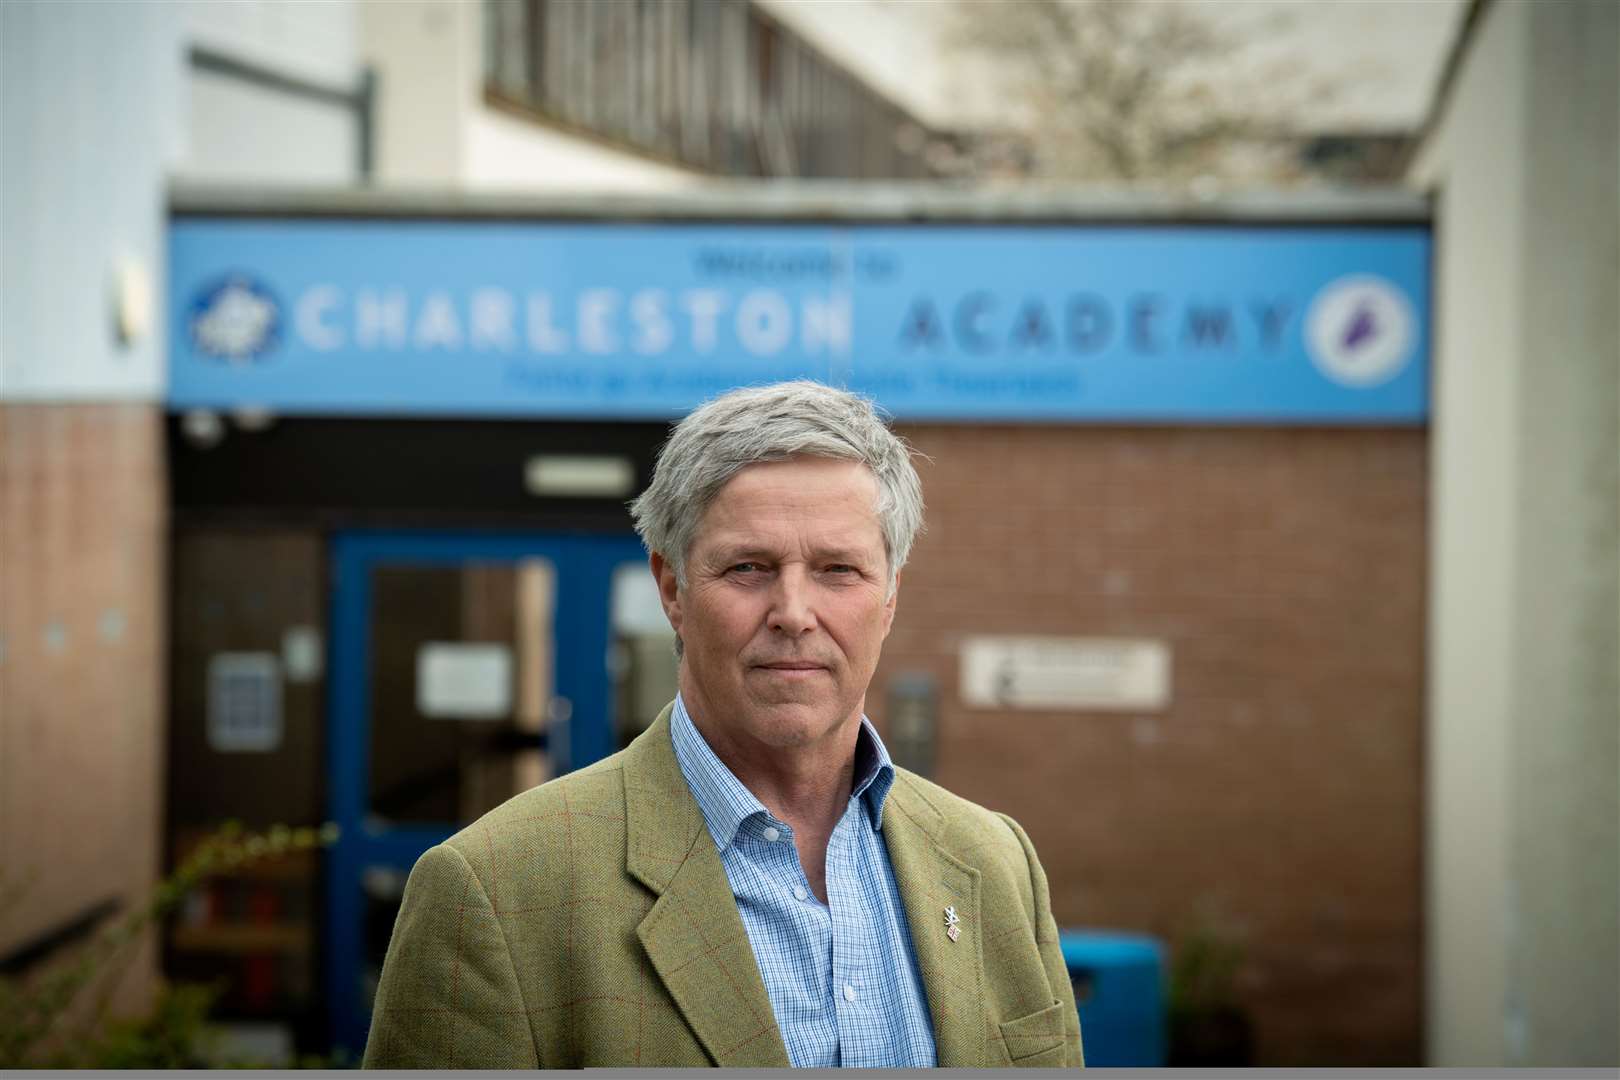 Scottish Conservative Highlands and Islands MSP Edward Mountain after visiting Charleston Academy. Picture: Callum Mackay.